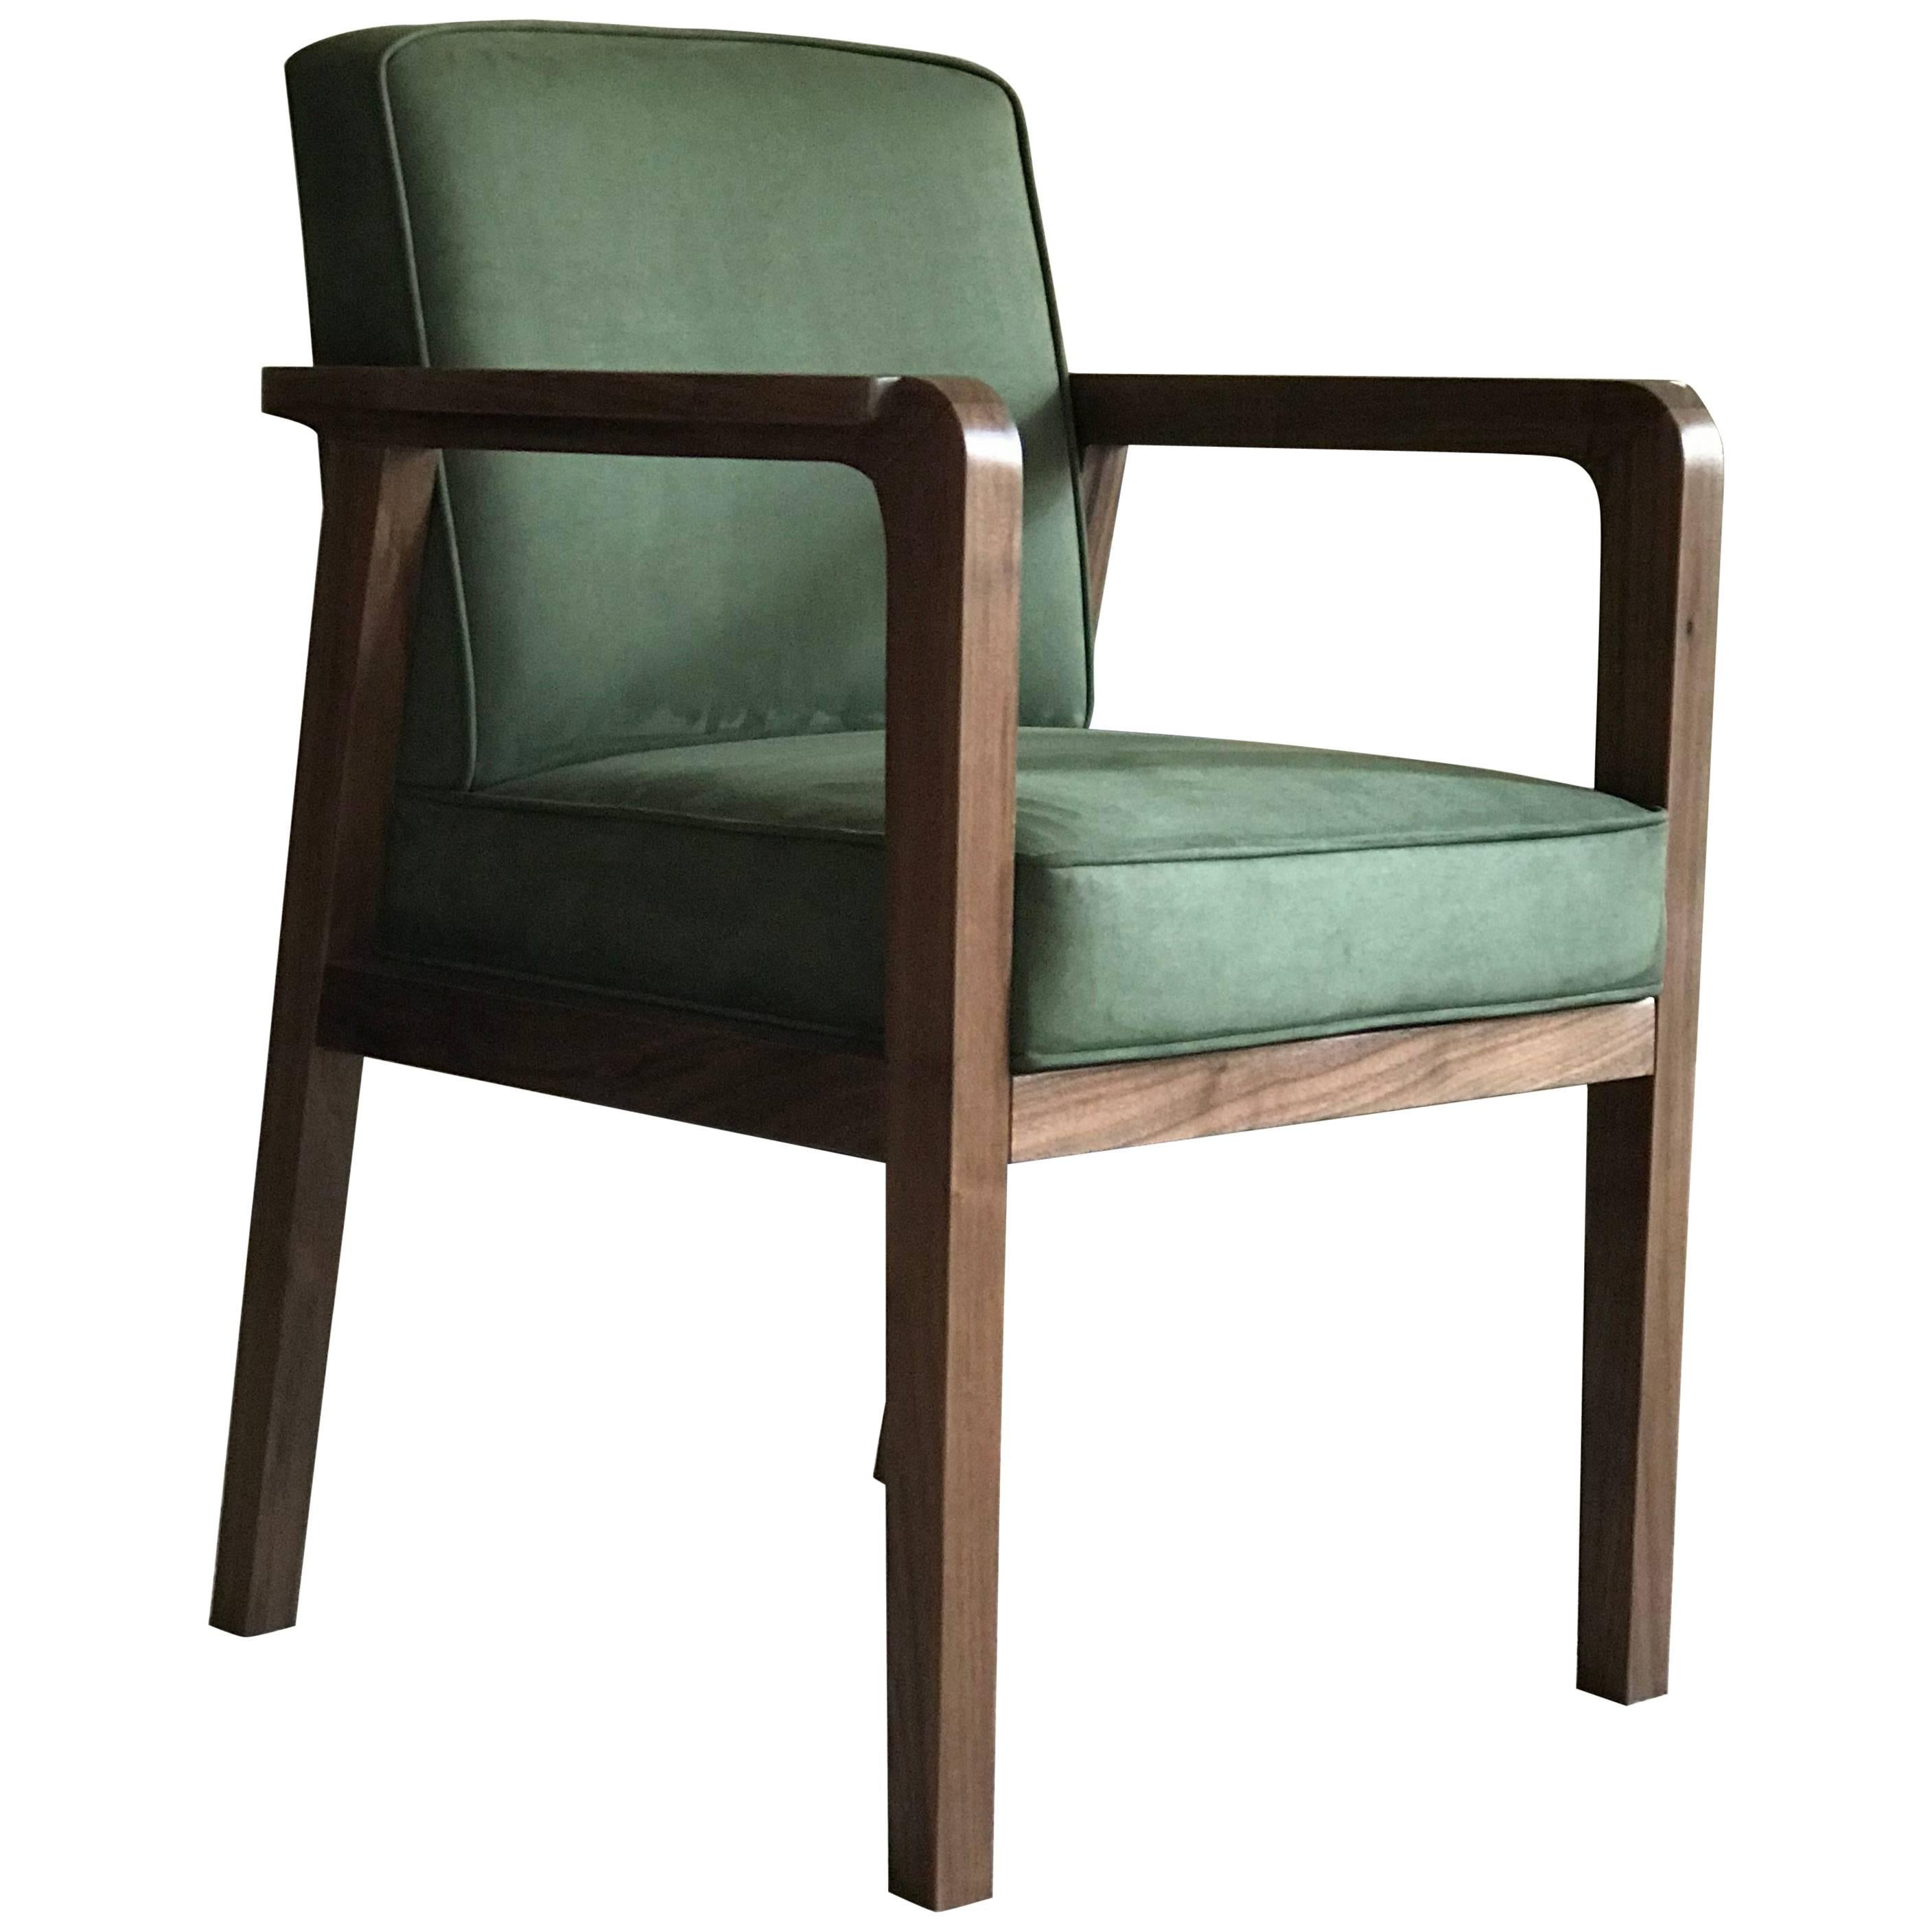 Atena Carver Chair in Walnut Upholstered with Nova Suede